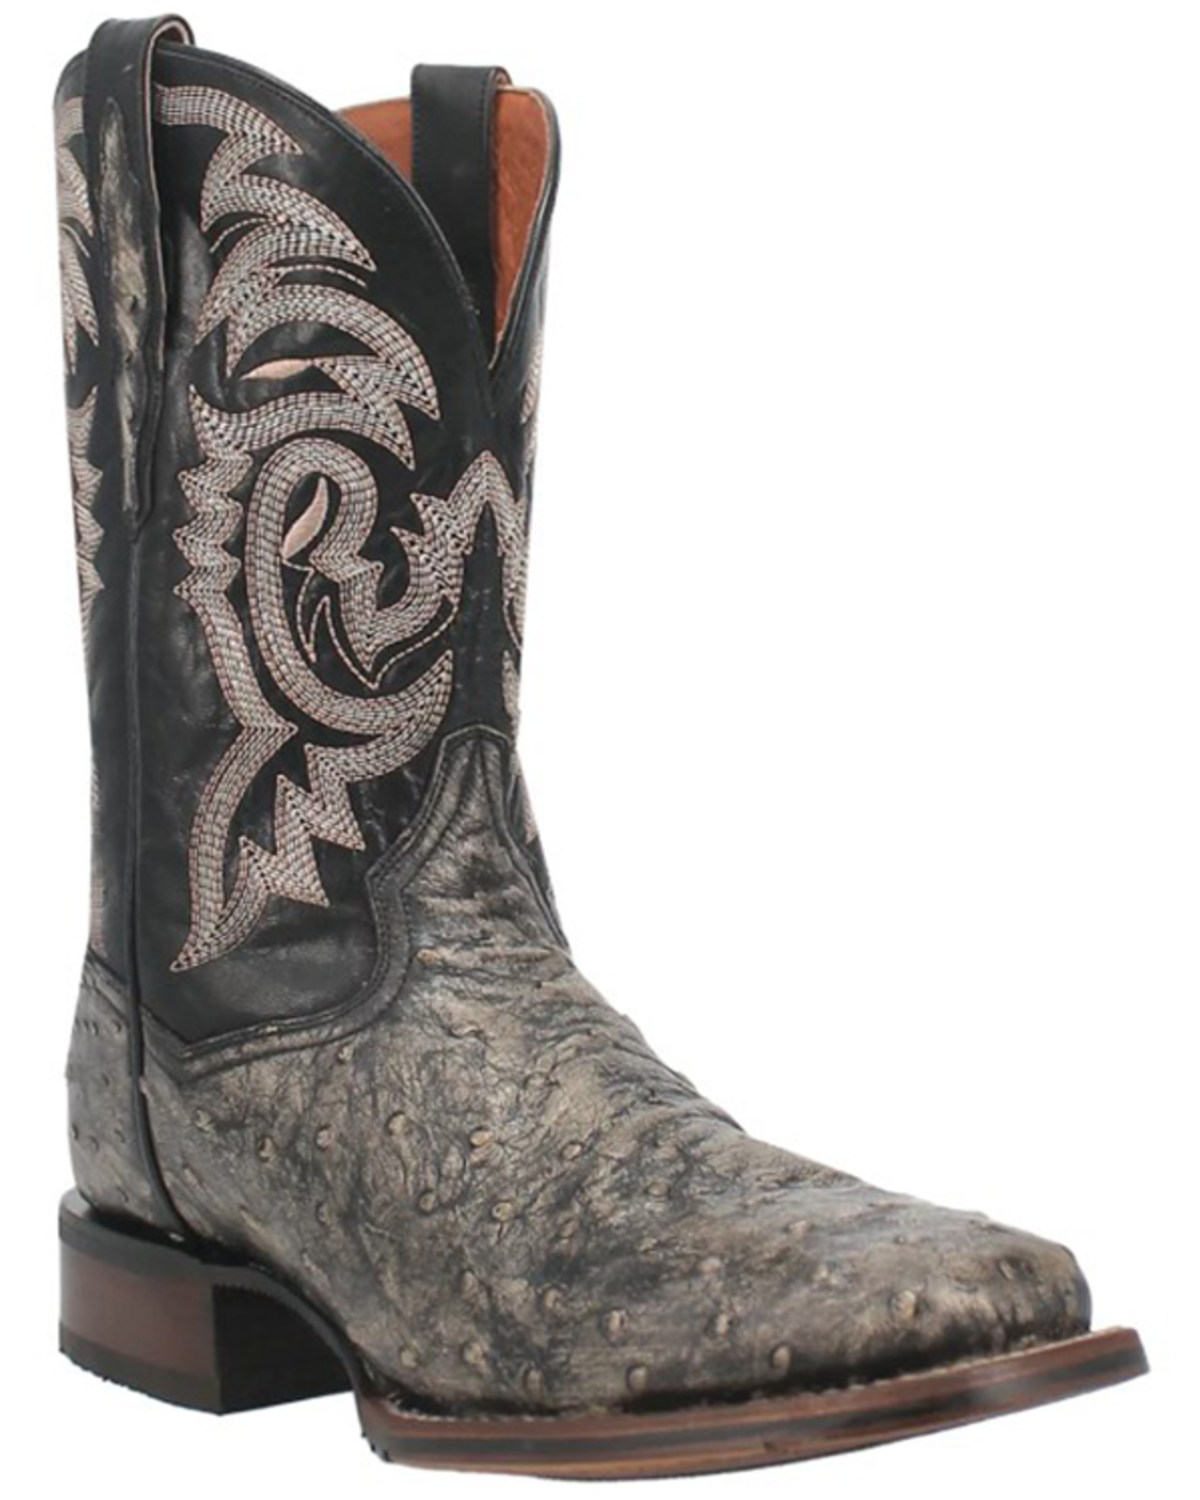 Dan Post Men's Dillinger Full Quill Ostrich Western Boots - Broad Square Toe